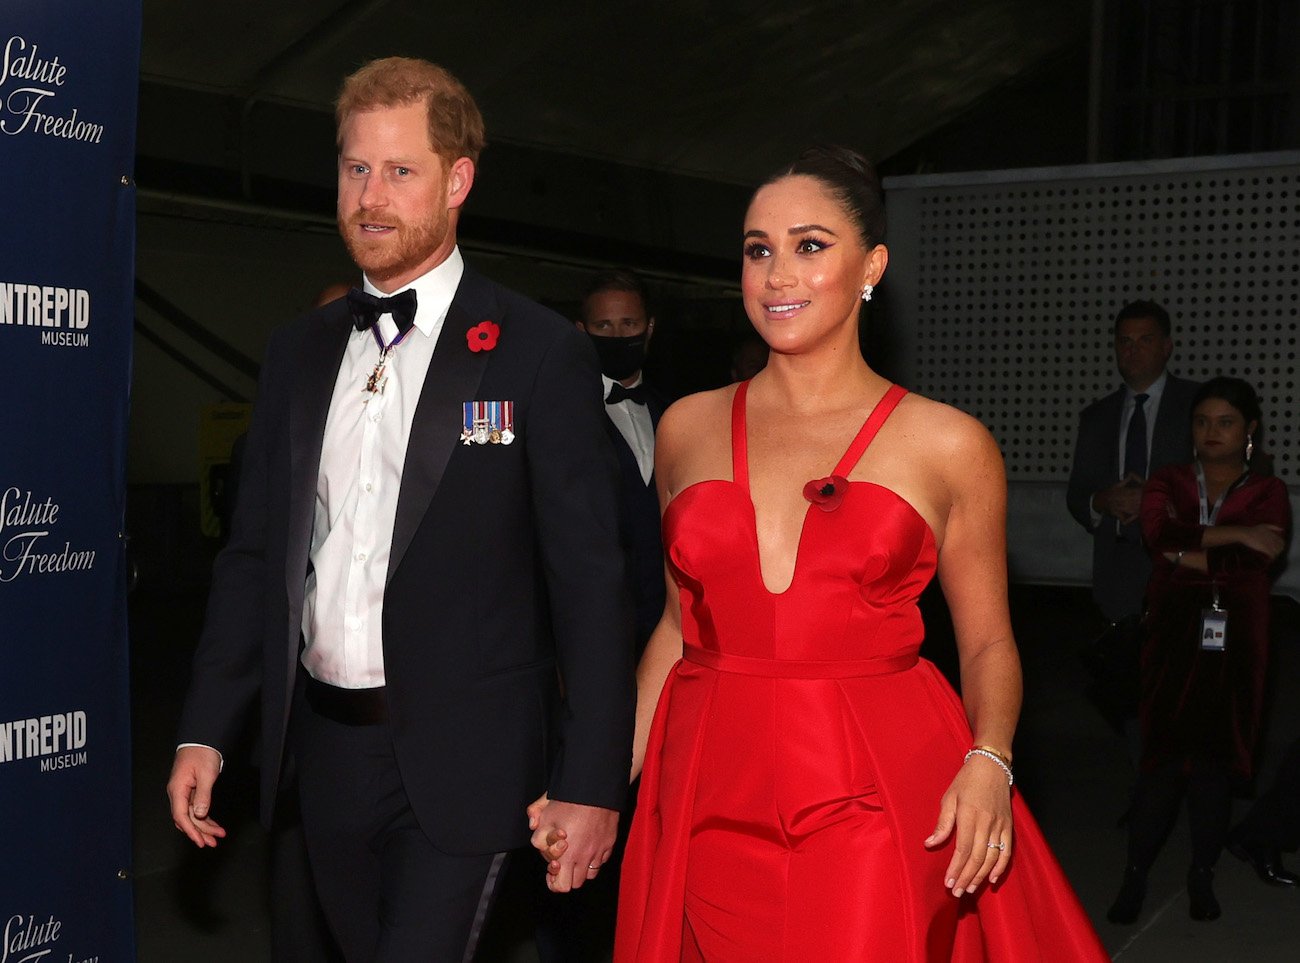 Prince Harry wears a tuxedo as he holds hands with Meghan Markle who wears a red gown